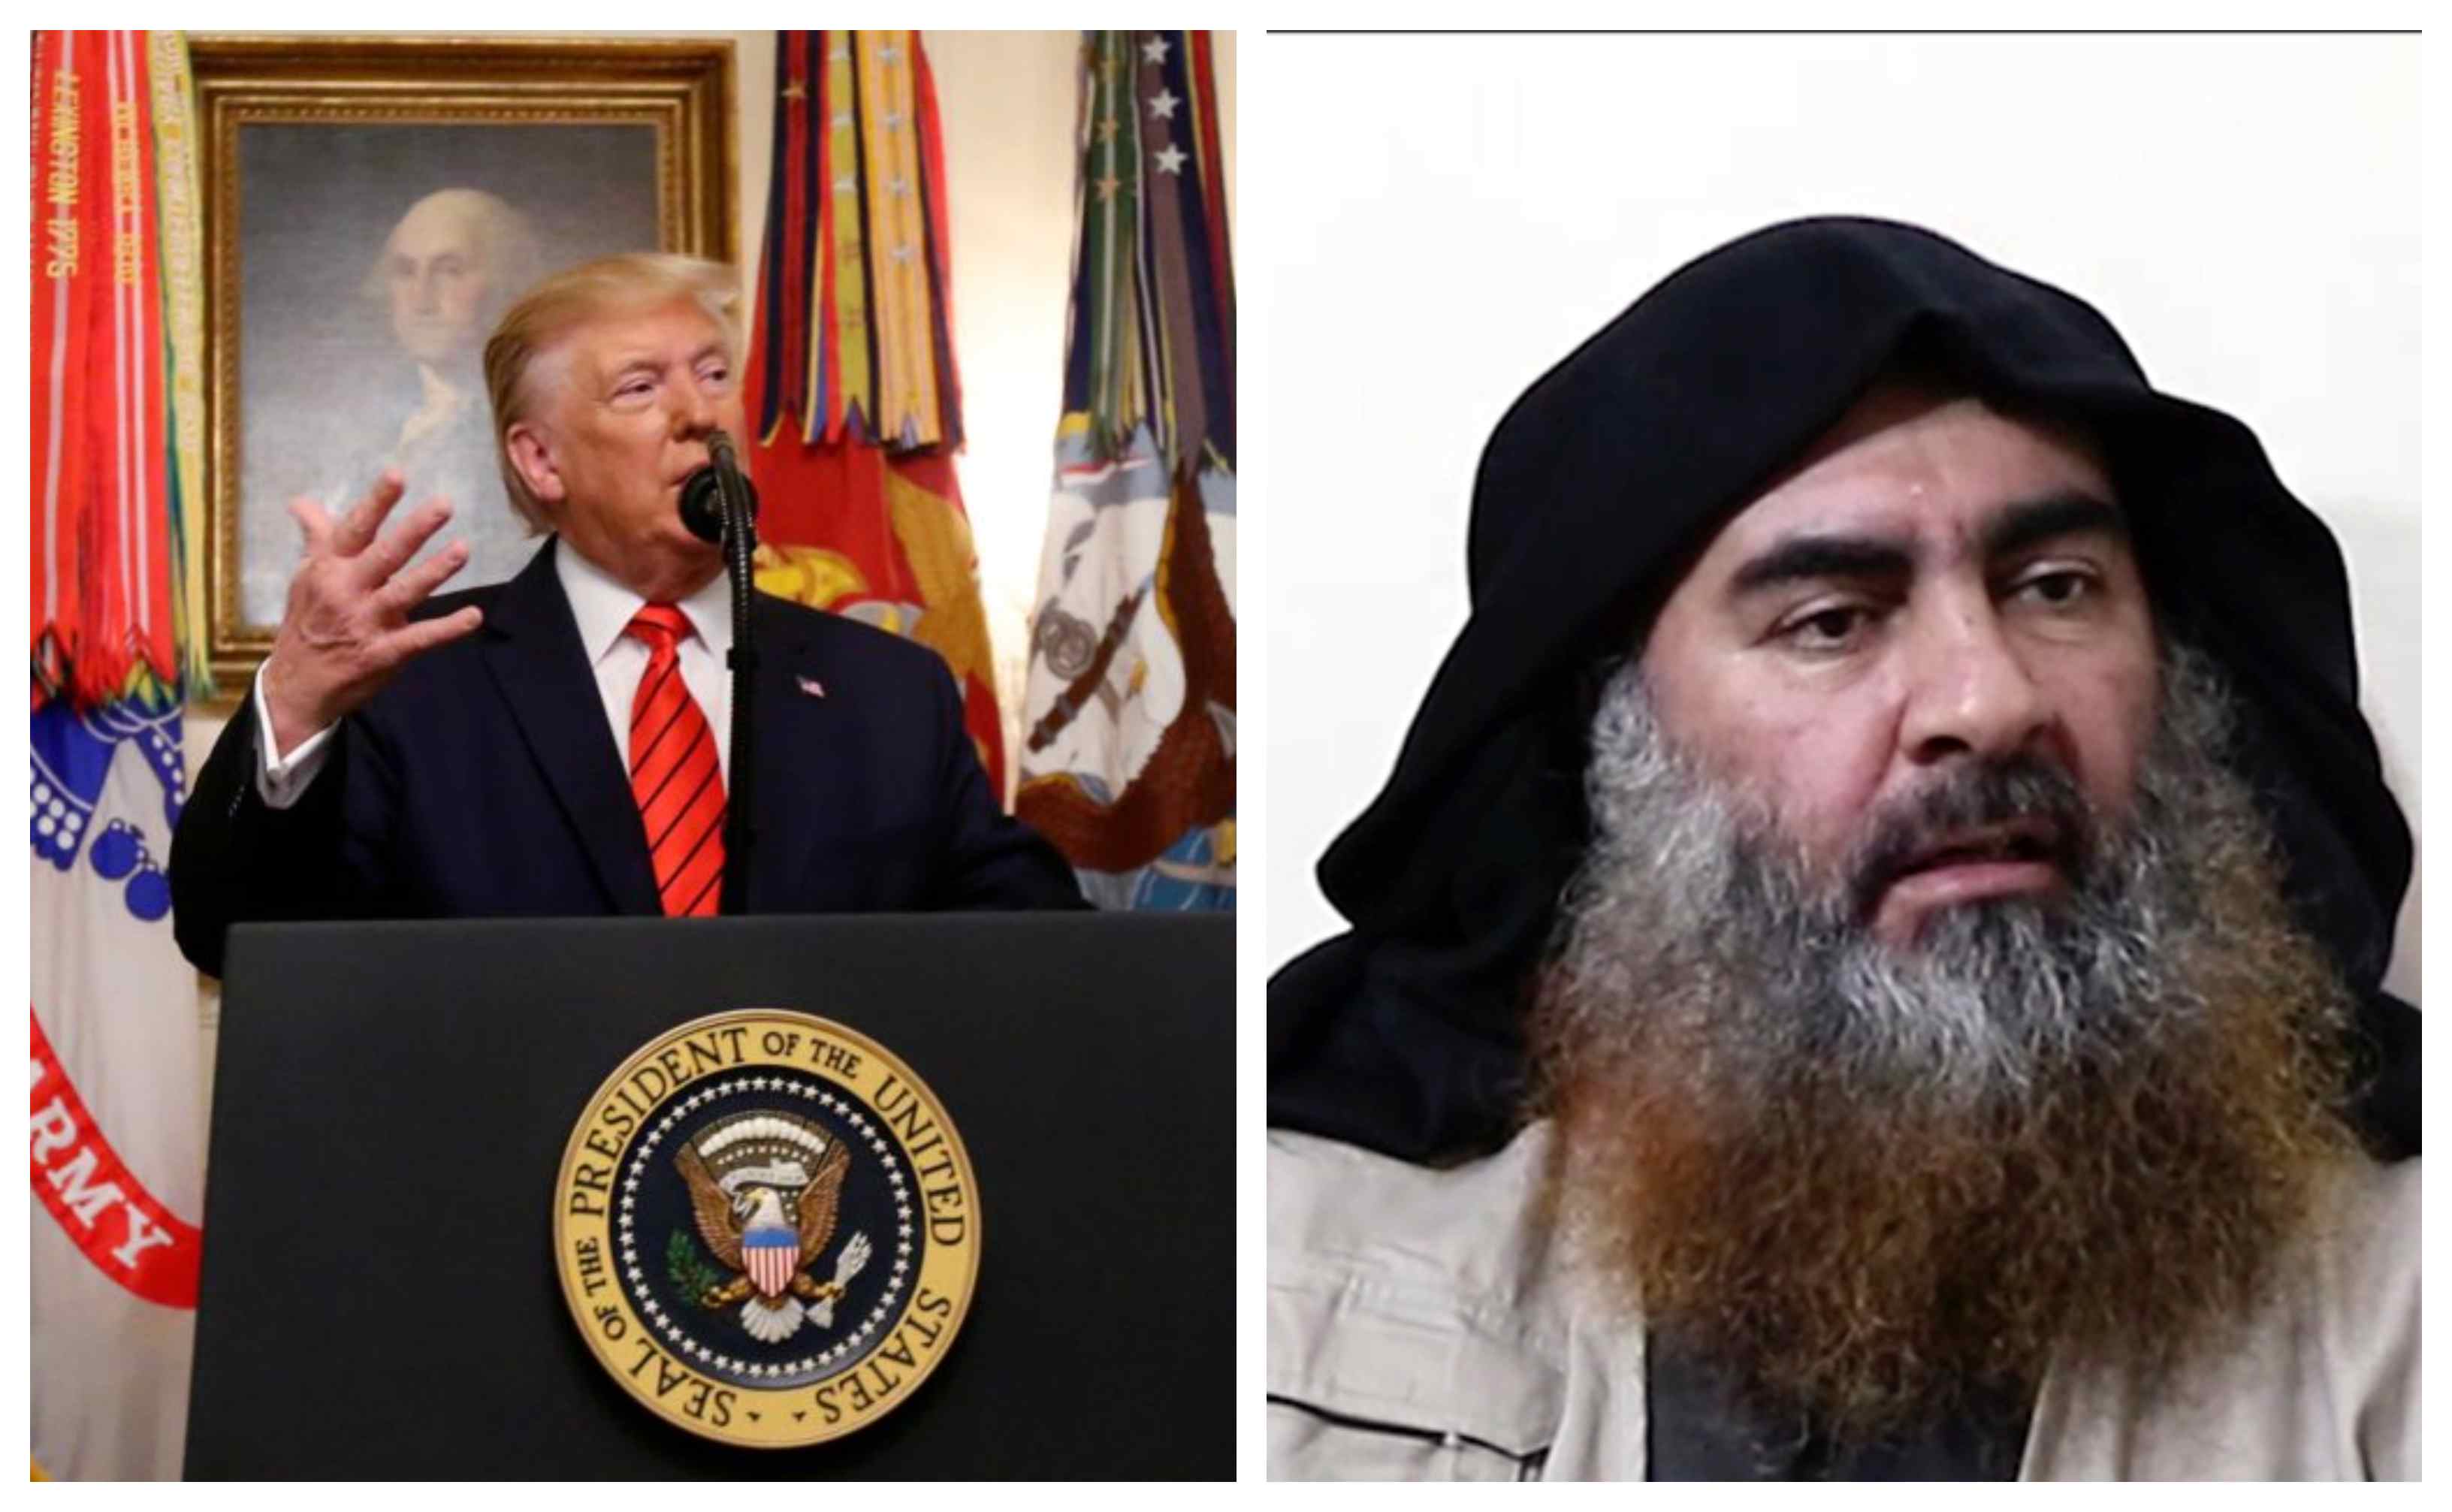 Islamic State leader Baghdadi died ‘in panic and dread’, says Trump